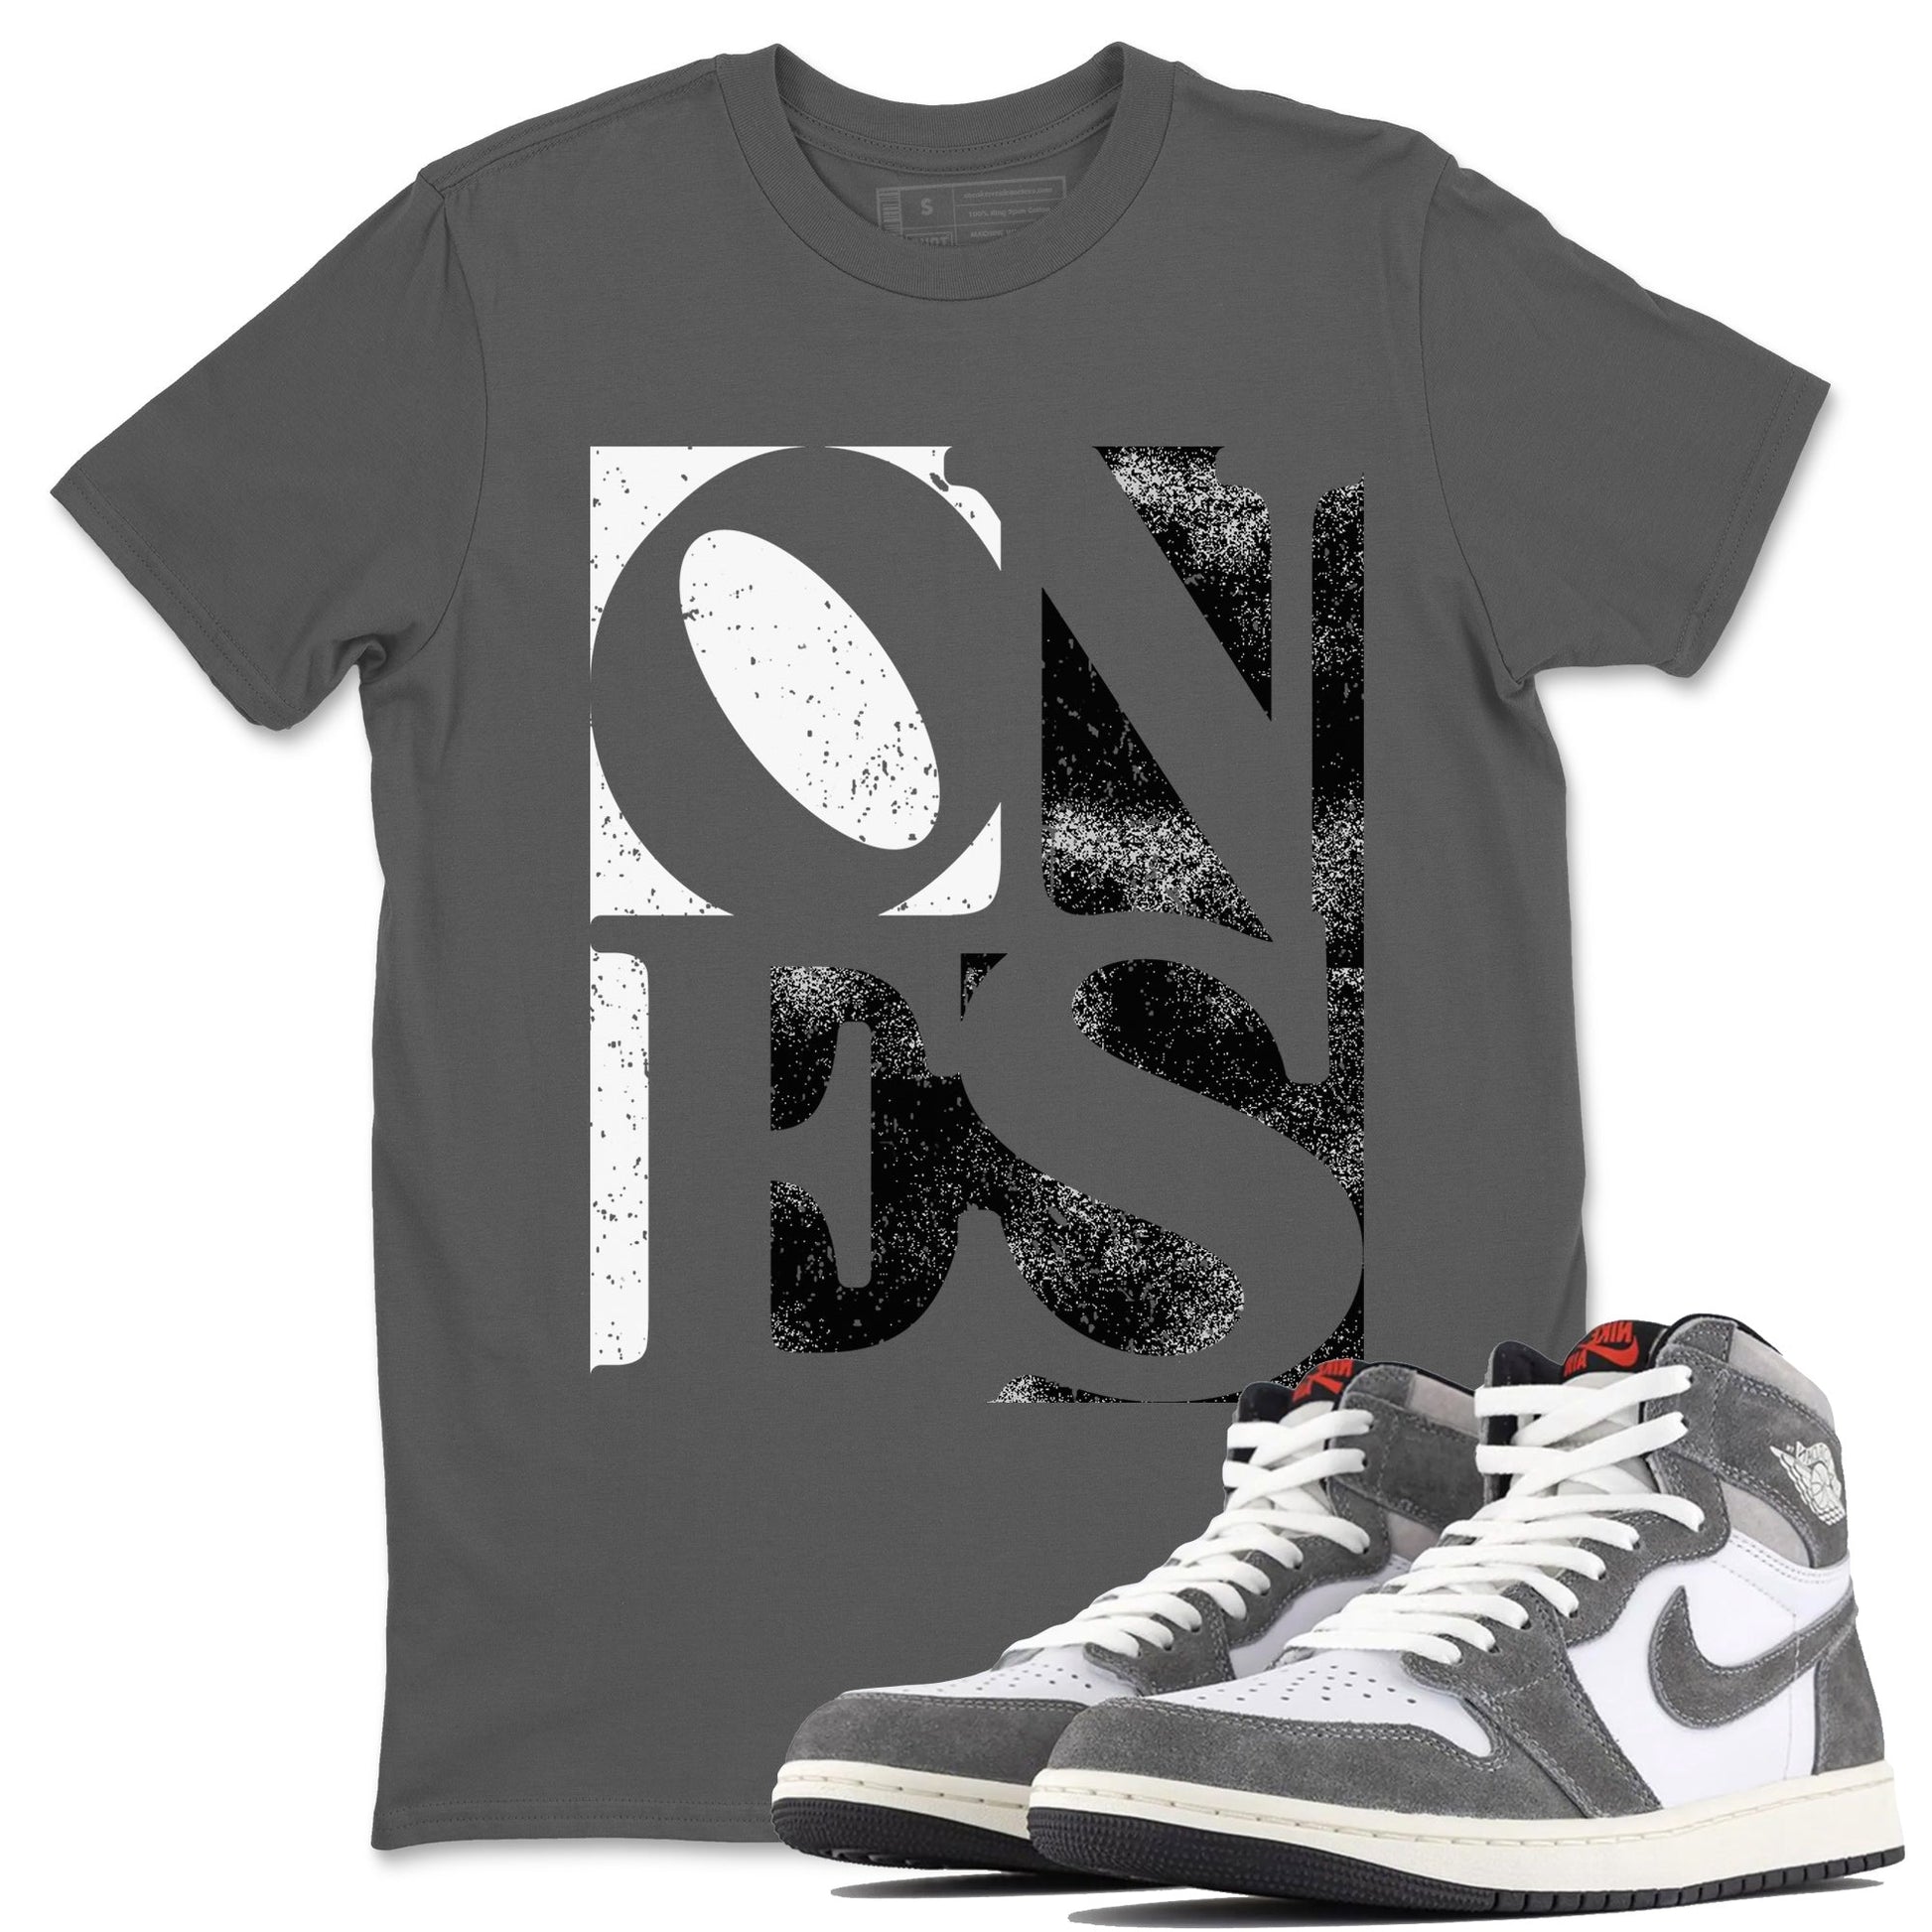 Air Jordan 1 Washed Heritage Ones Crew Neck Streetwear Sneaker Shirt Air Jordan 1 Washed Heritage Sneaker T-Shirts Washing and Care Tip